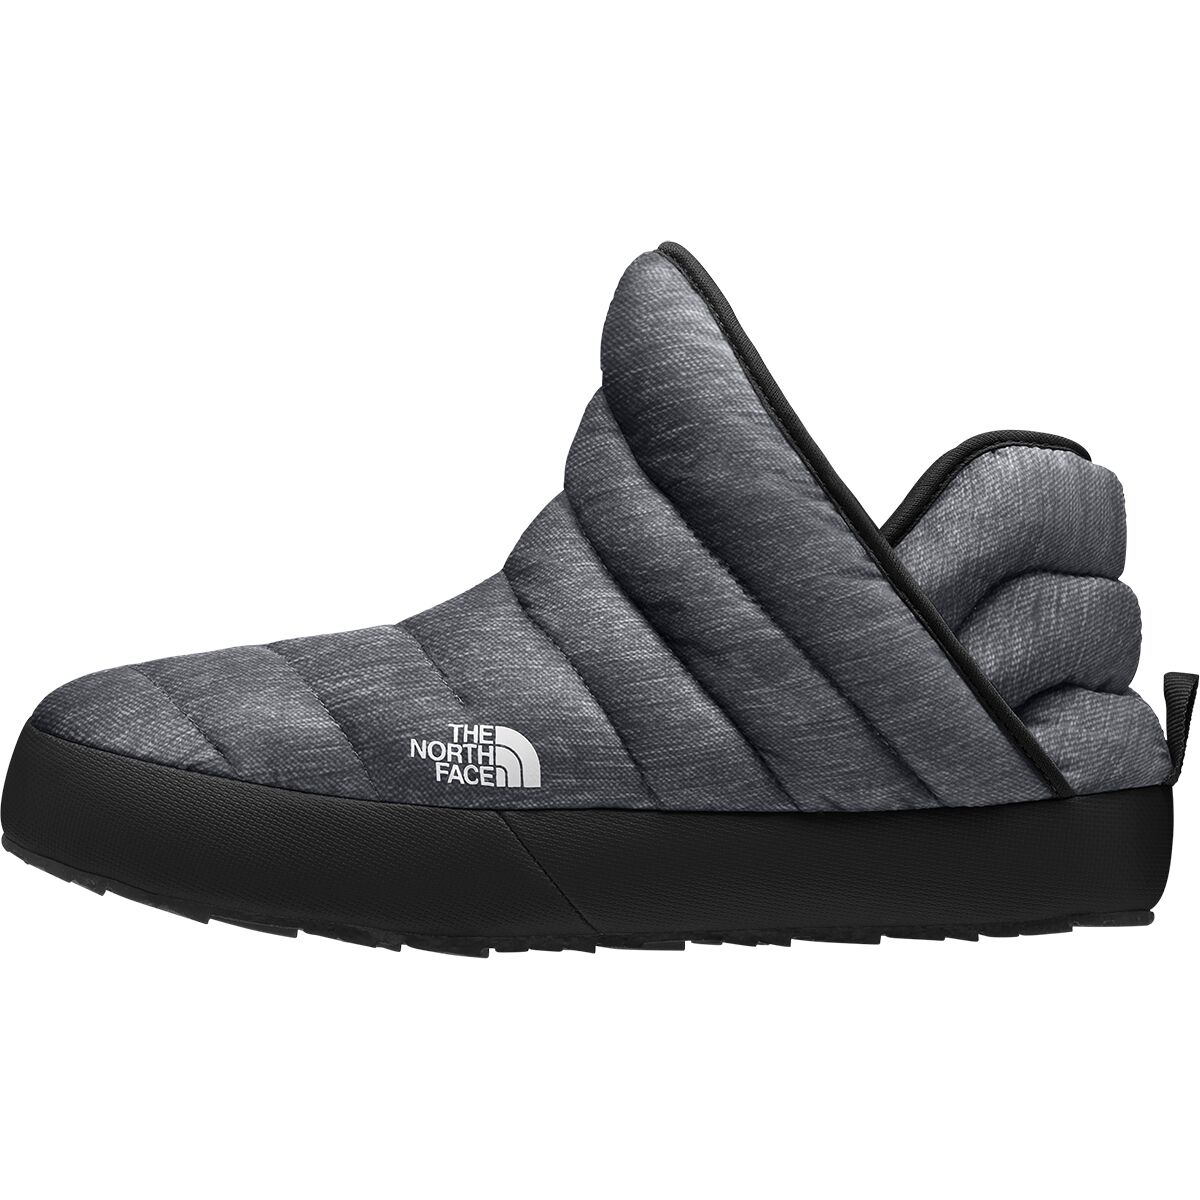 The North Face ThermoBall Eco Traction Bootie - Women's